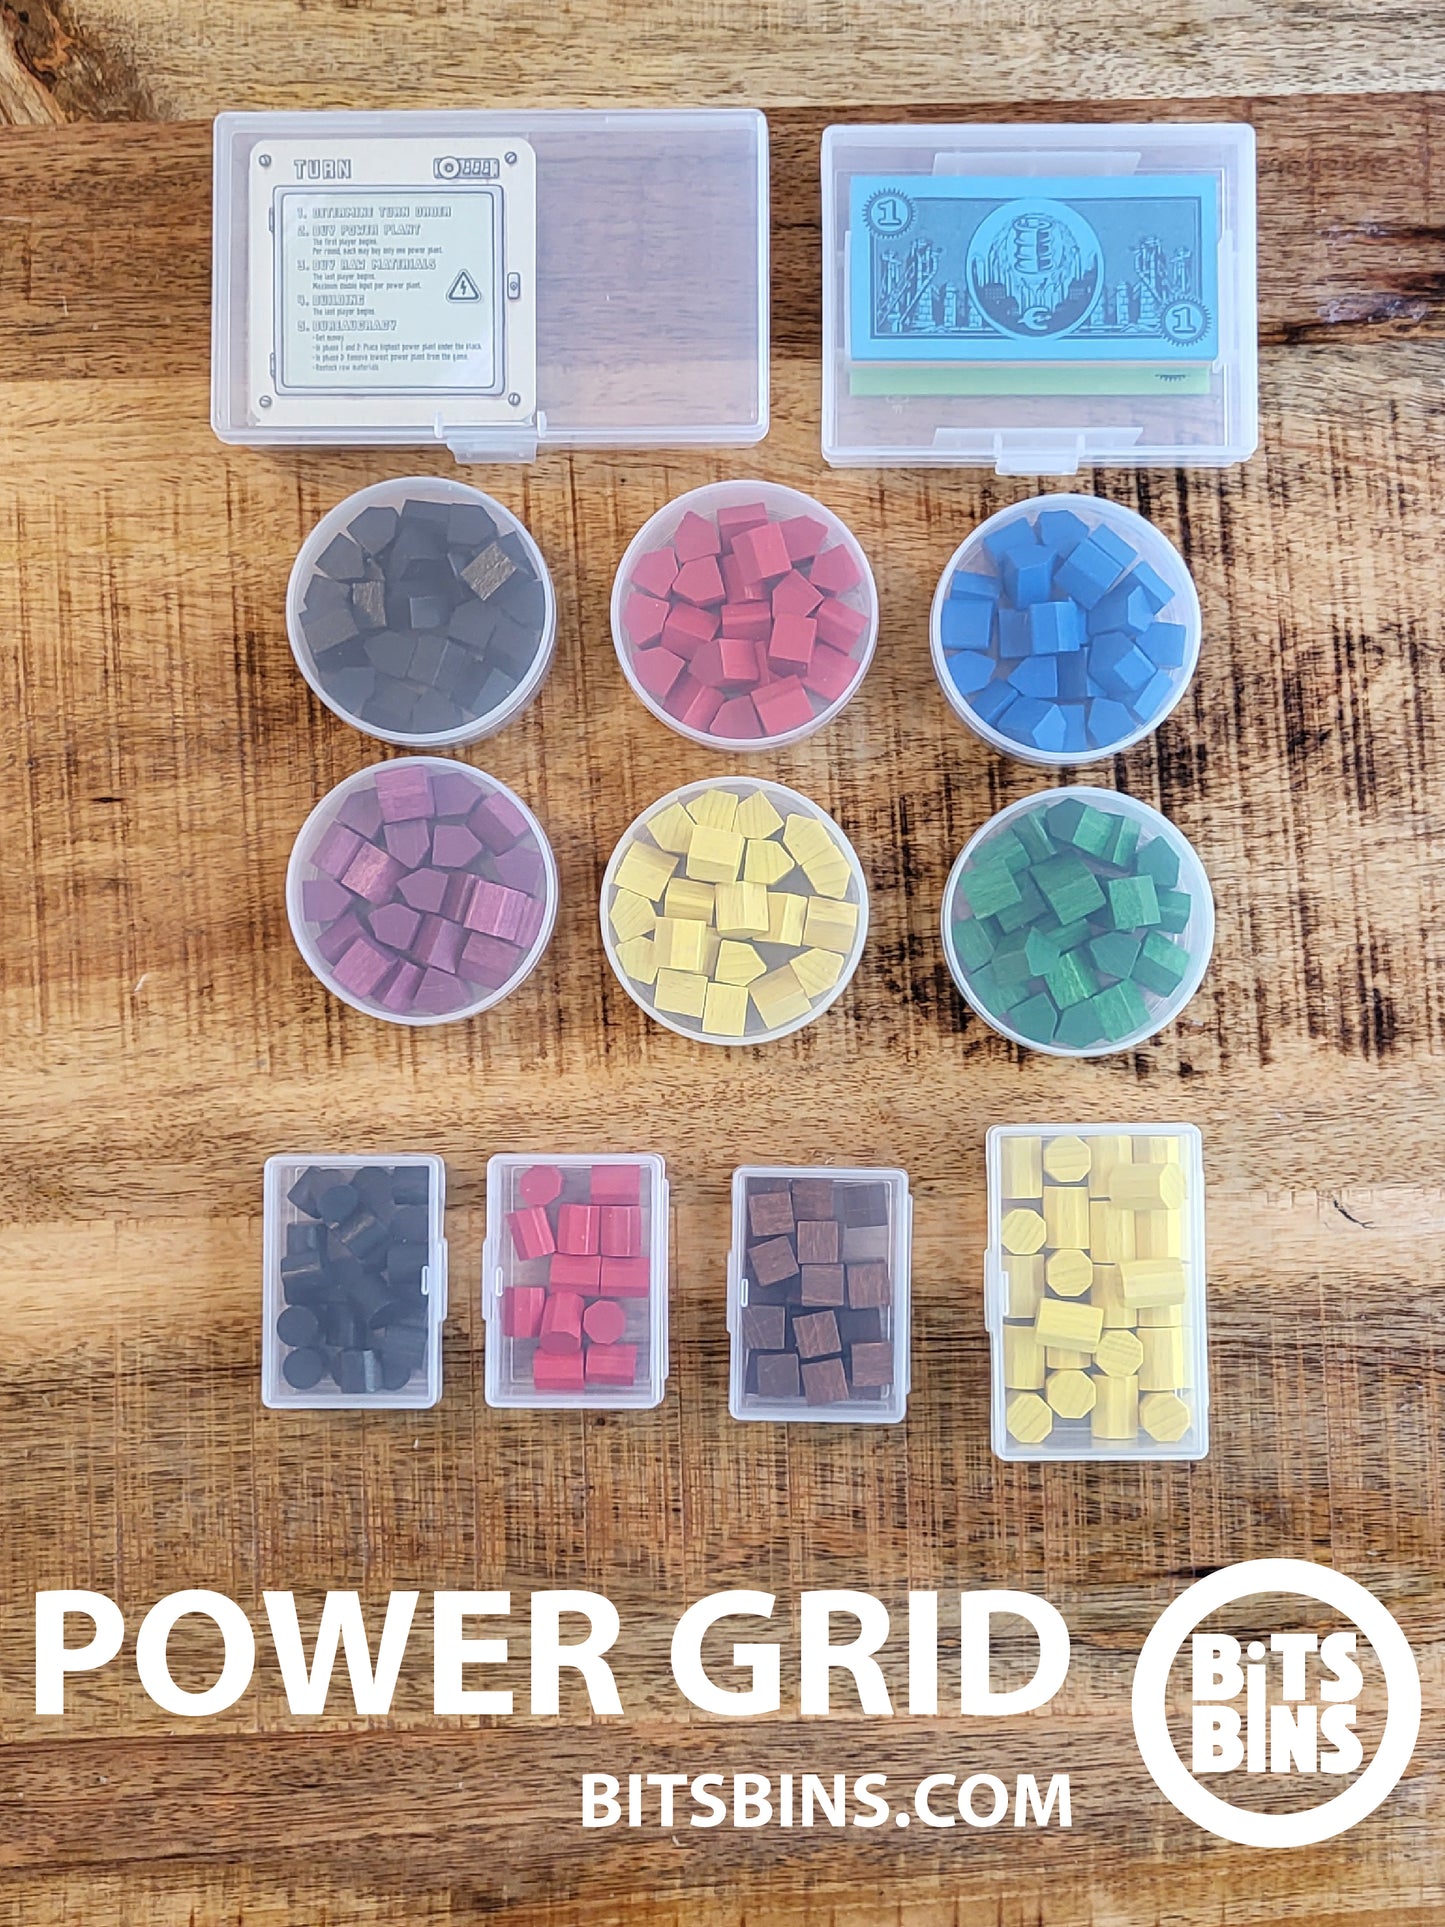 RECOMMENDED Bitsbins Power Grid - 6 Pods, 3 Minis, 1 Original, 1 Card Box, 1 Tile